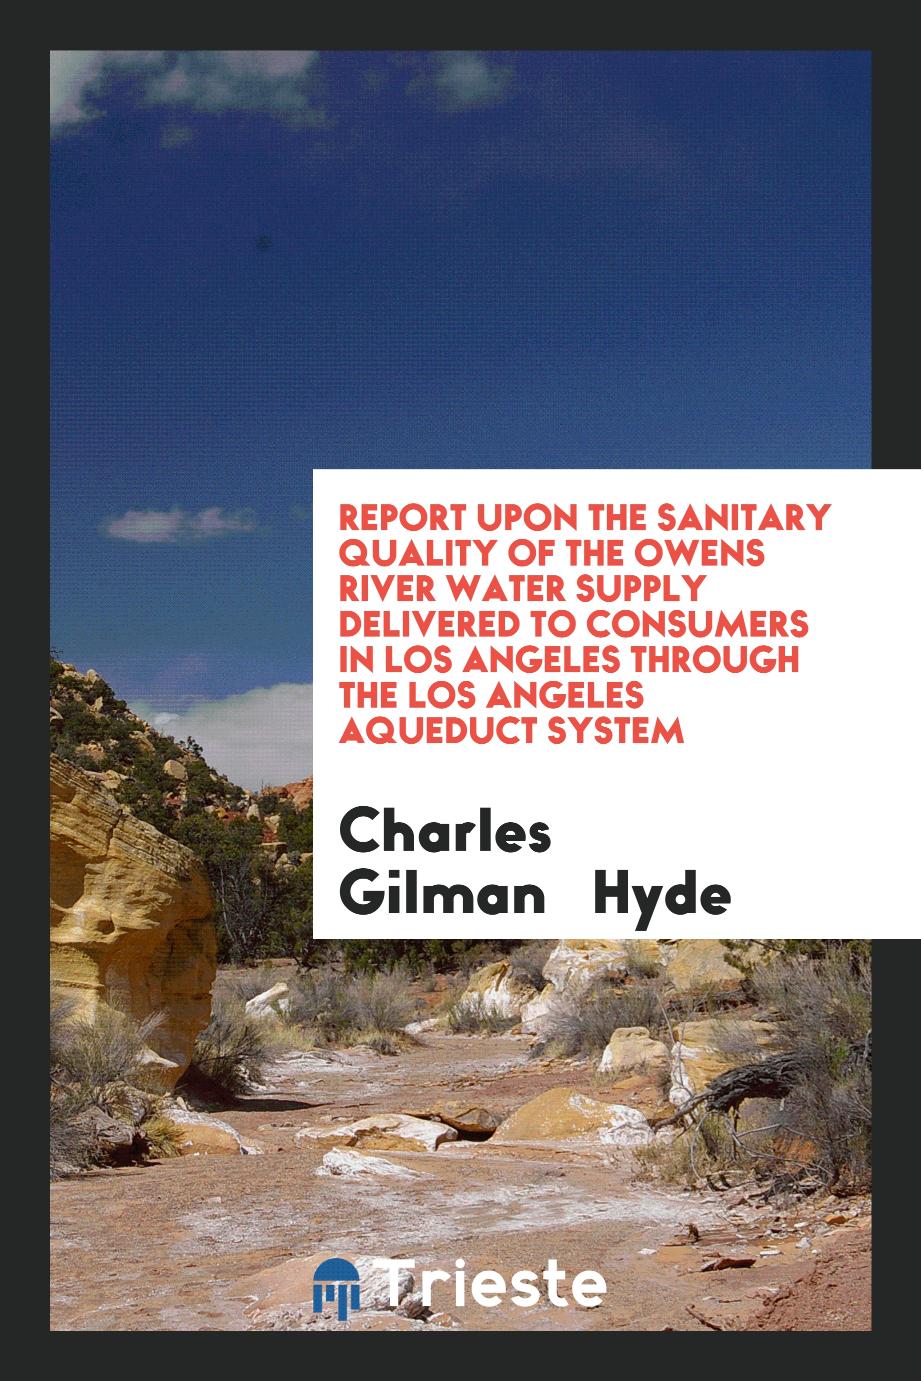 Report Upon the Sanitary Quality of the Owens River Water Supply delivered to consumers in Los Angeles through the Los Angeles Aqueduct System